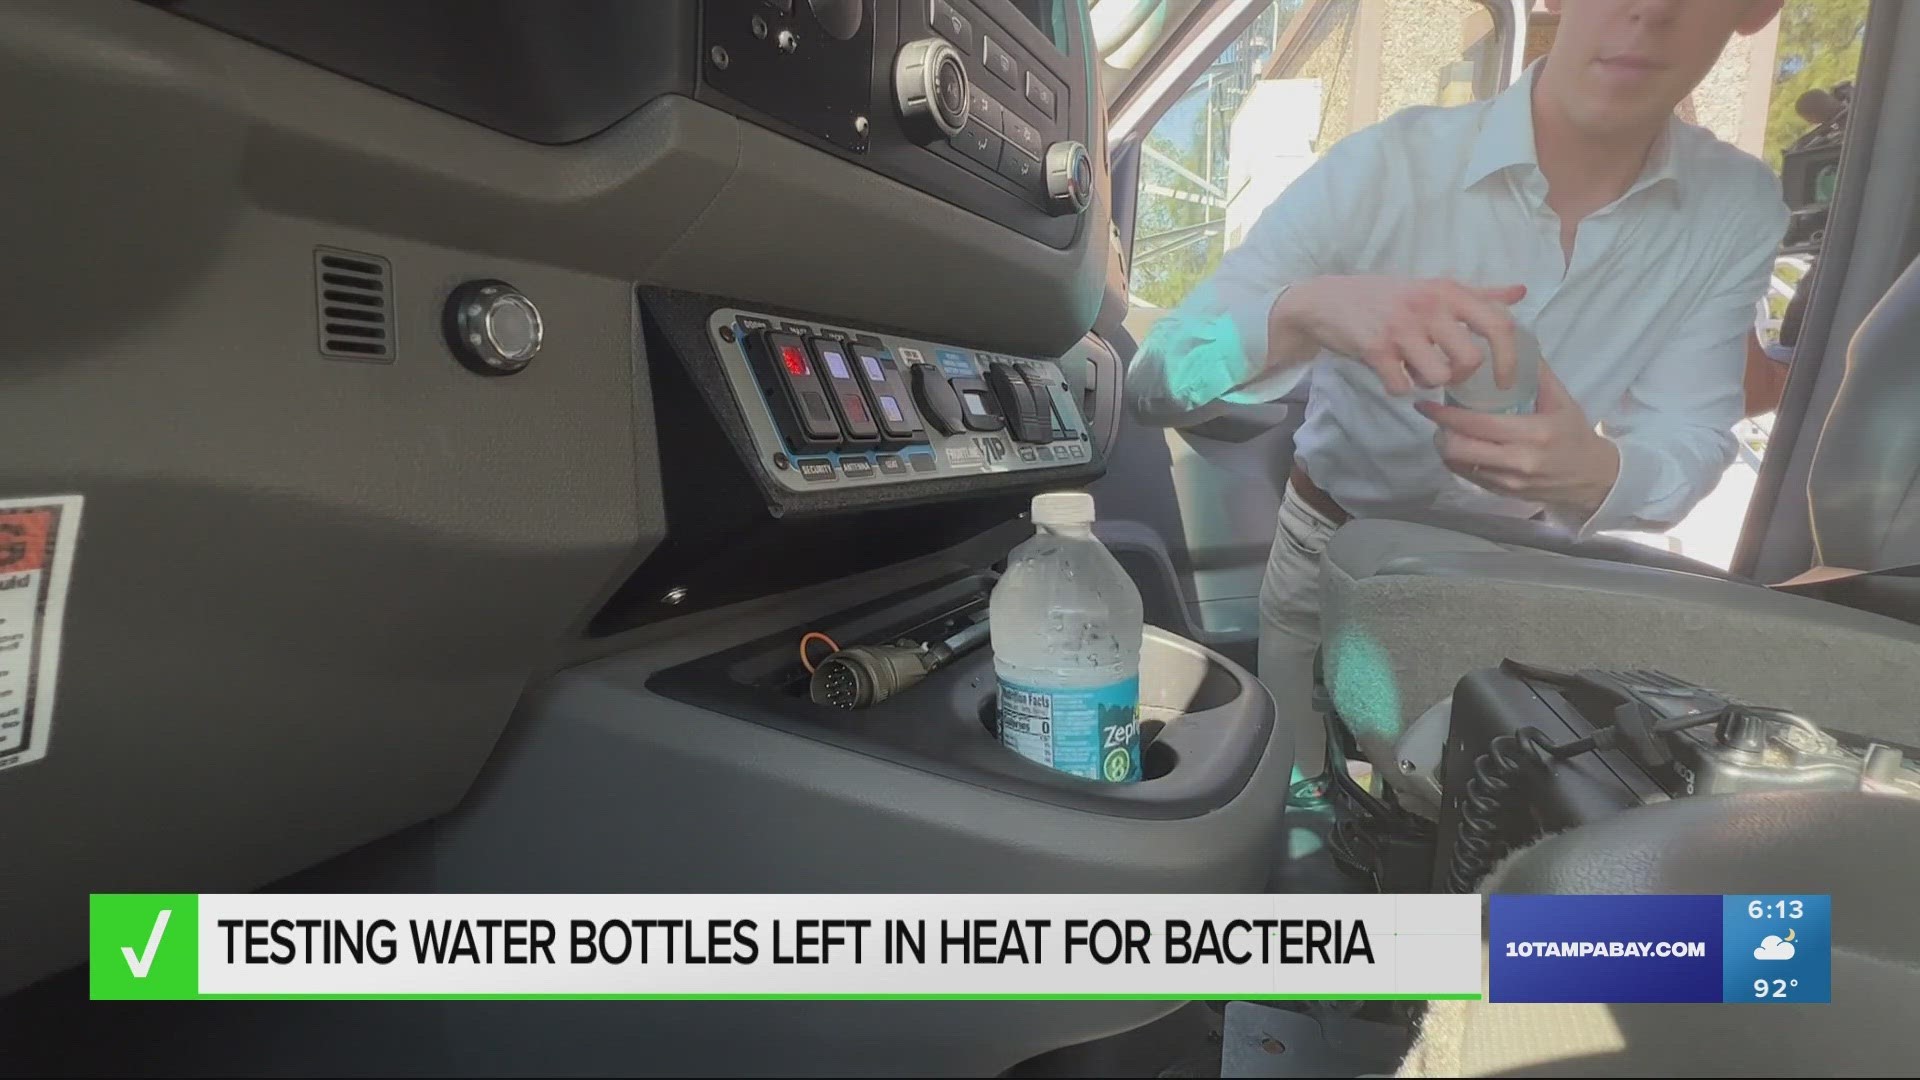 VERIFY tested bacteria levels in unfinished water bottles left in a hot car for several days.